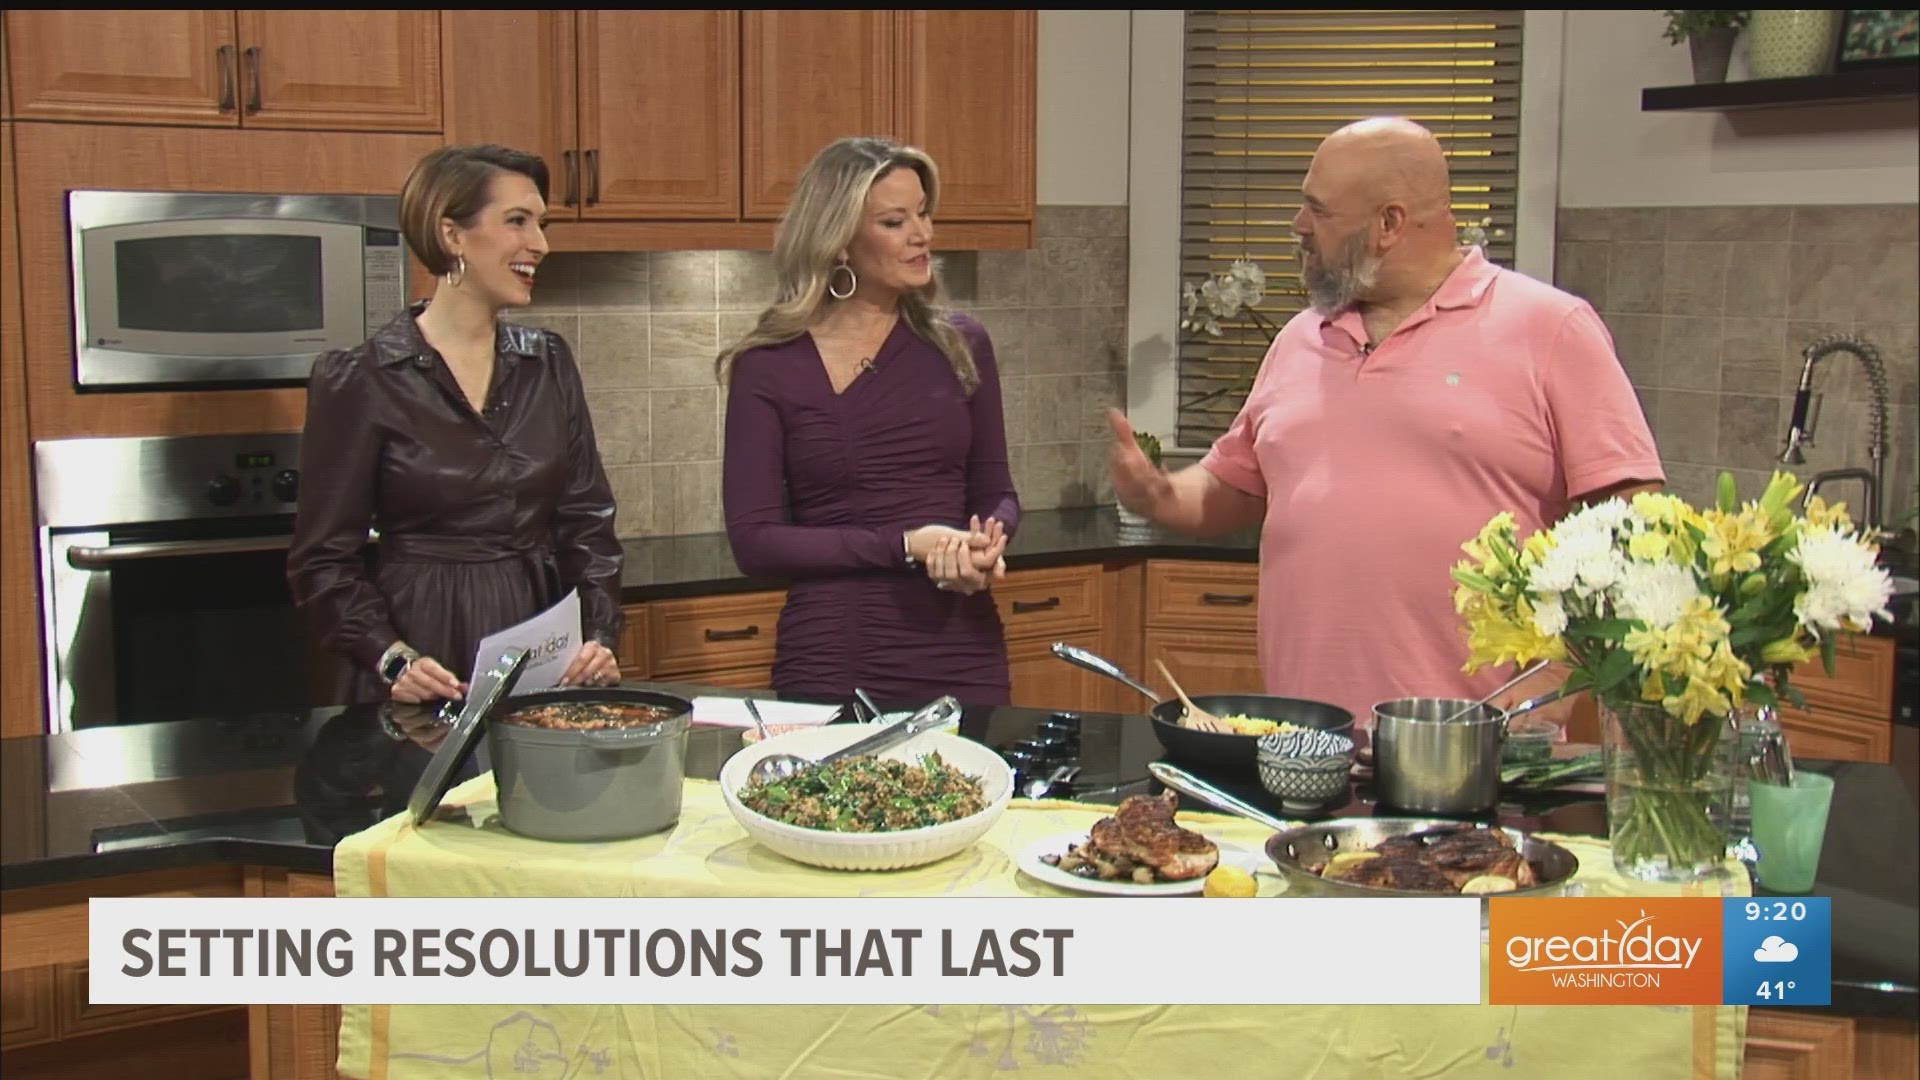 Jonathan Bardzik shares joy as a storyteller, cook, author and television personality. He shares several tips to make your resolutions last and a few simple recipes.